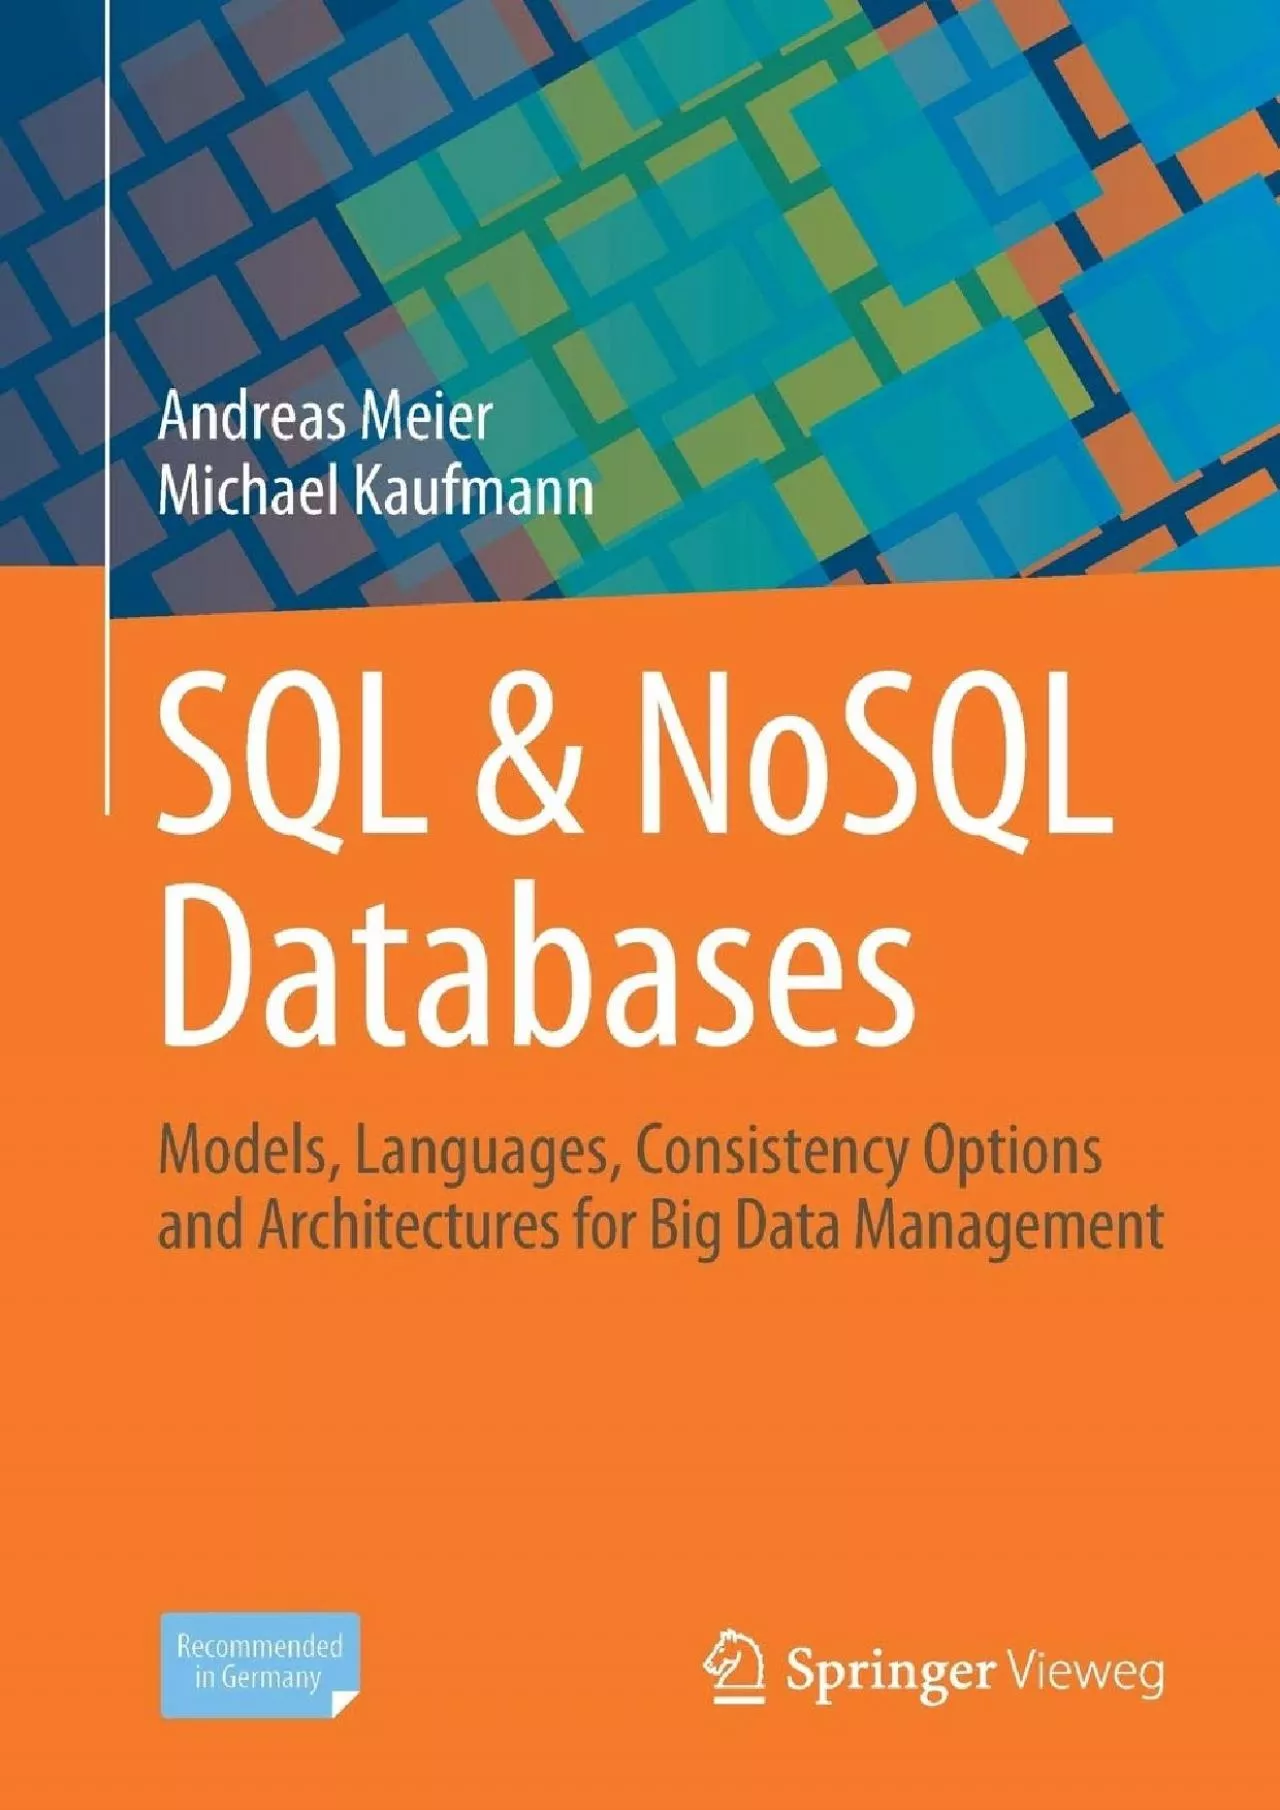 [READING BOOK]-SQL  NoSQL Databases: Models, Languages, Consistency Options and Architectures